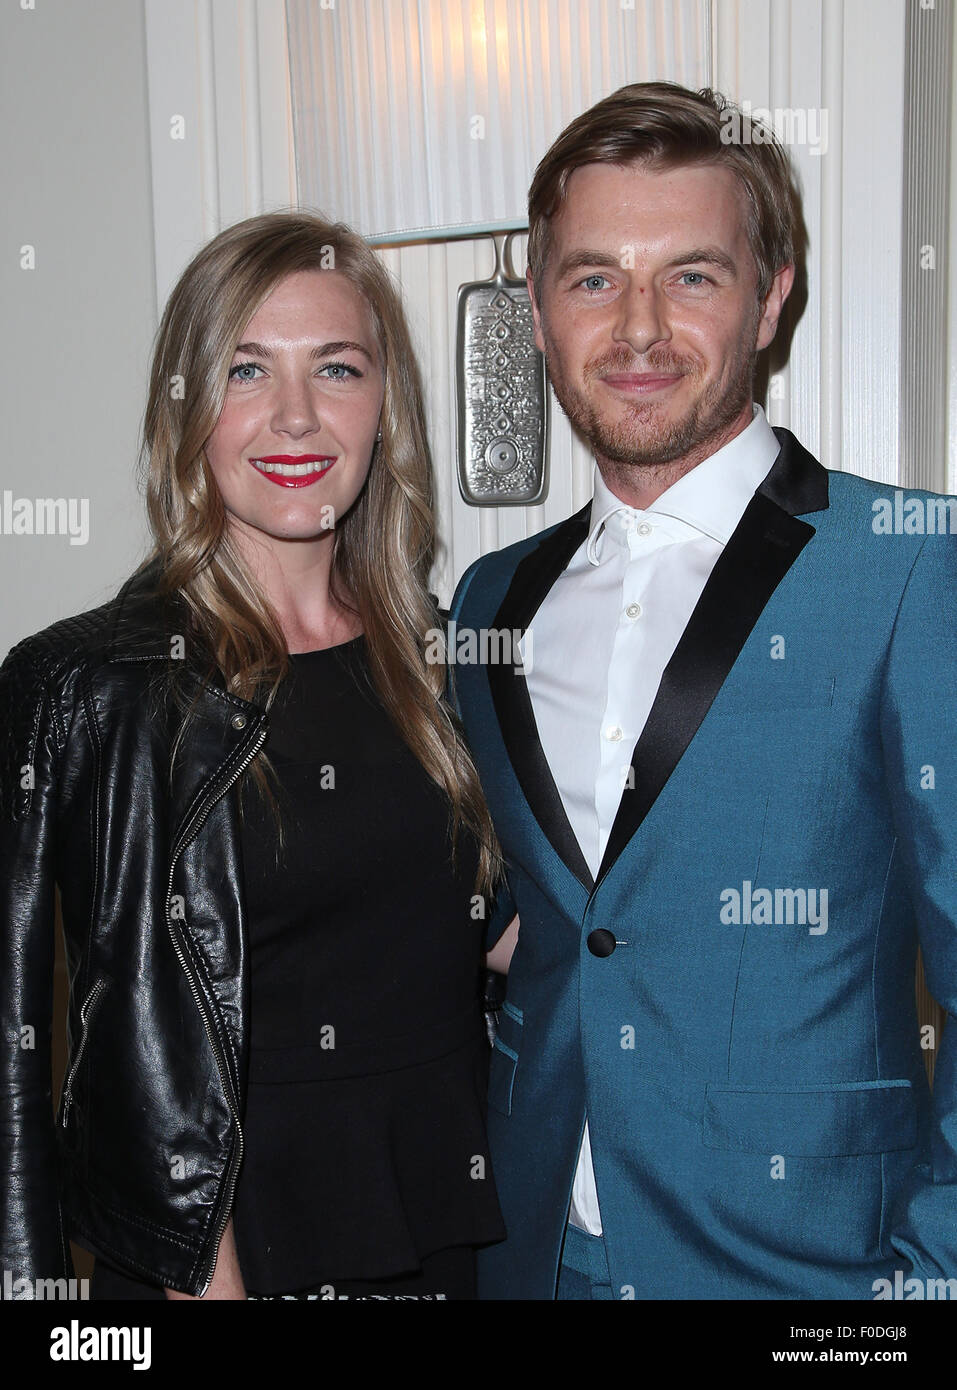 TheWrap's 2nd Annual Emmy Party Featuring: Michelle Cosnett, Rick ...